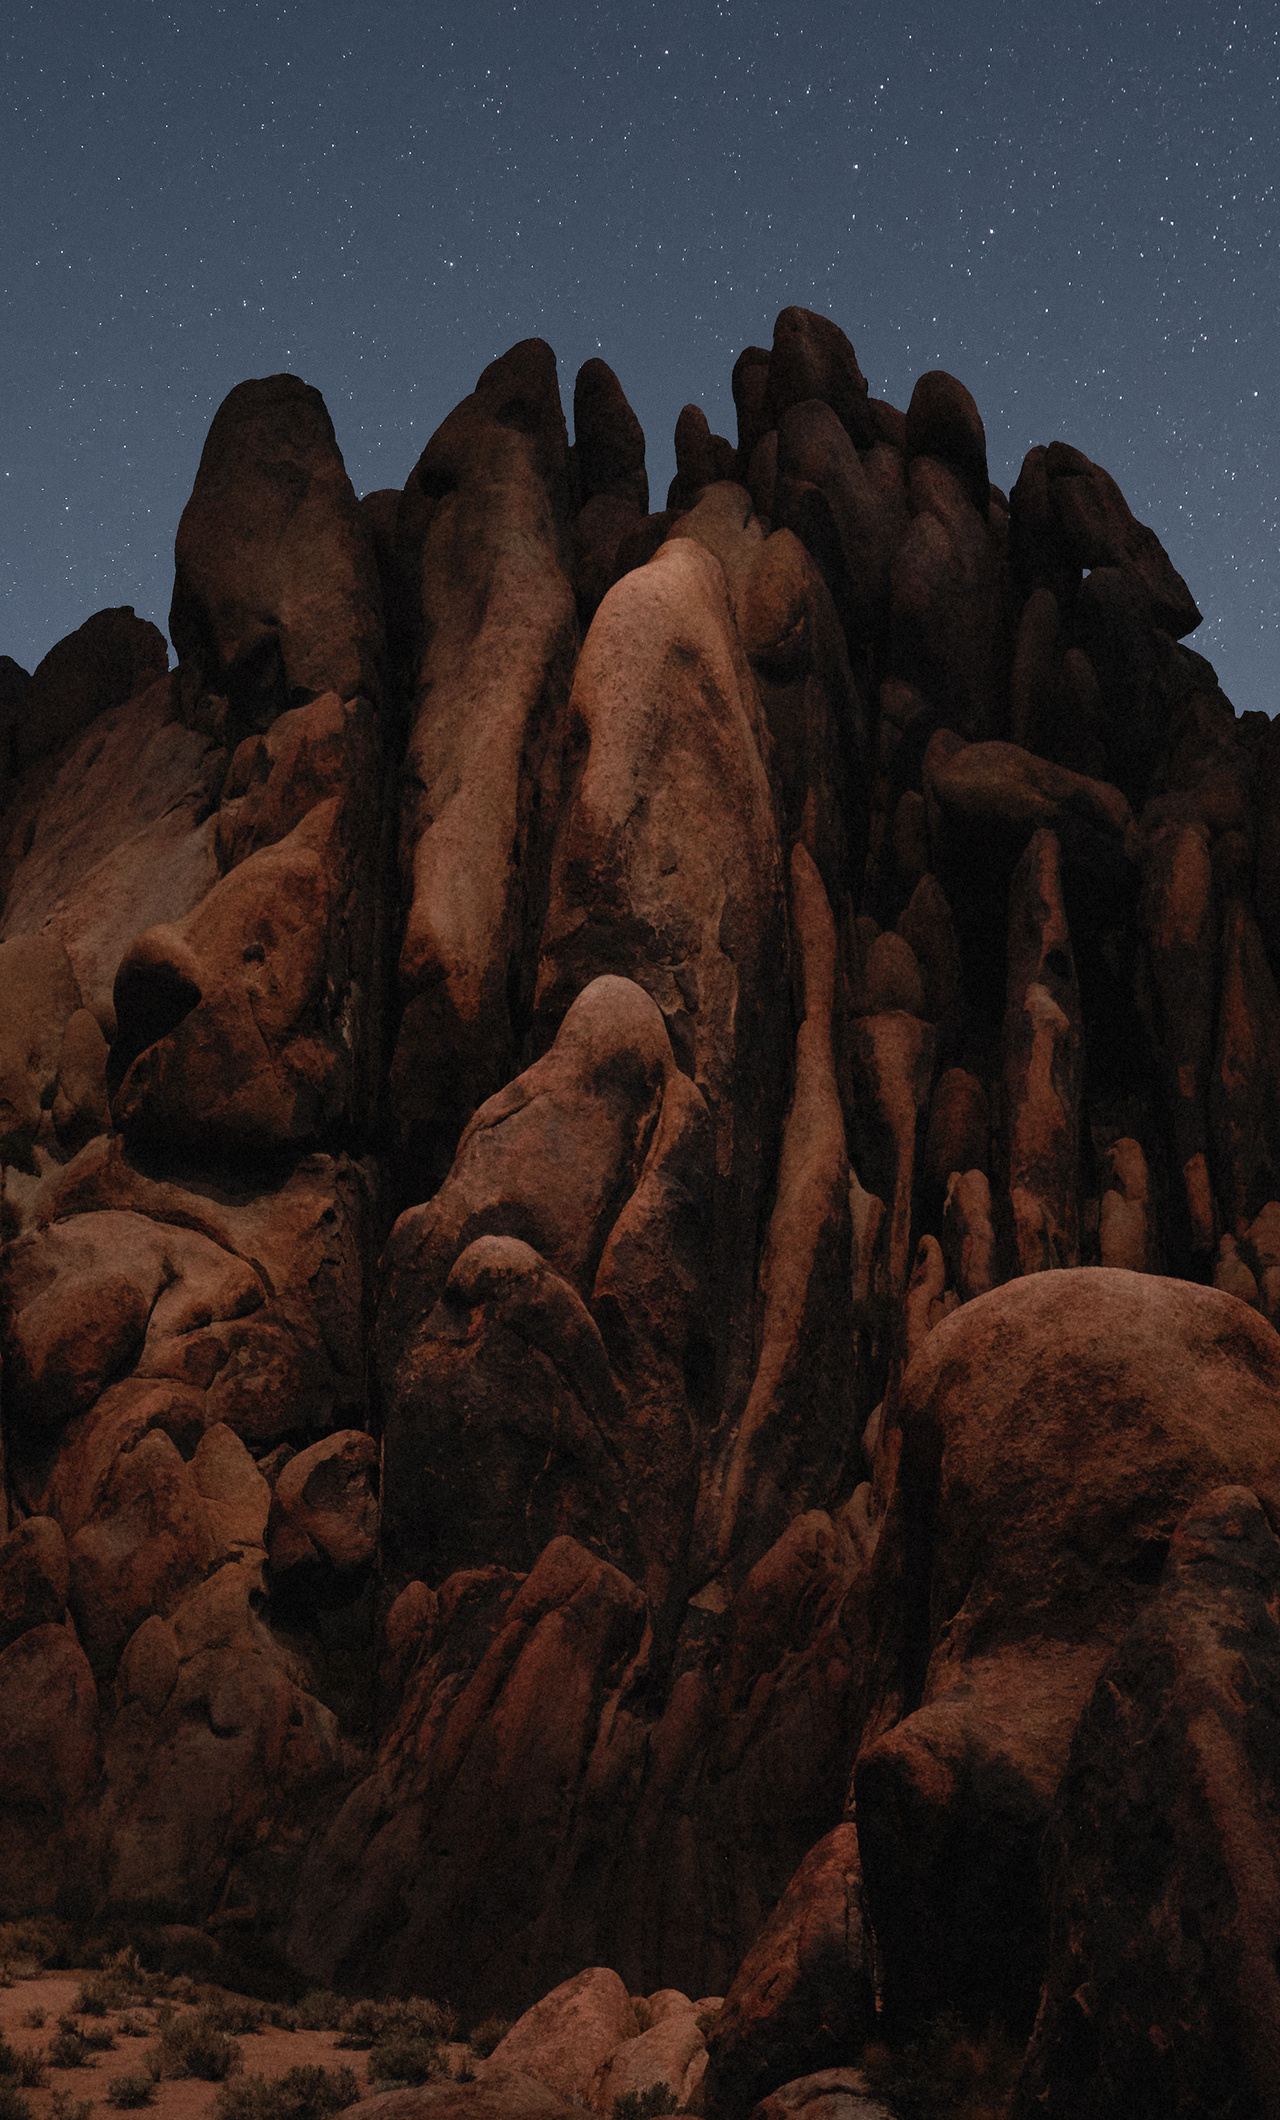 A rock formation in the desert at night - Rocks